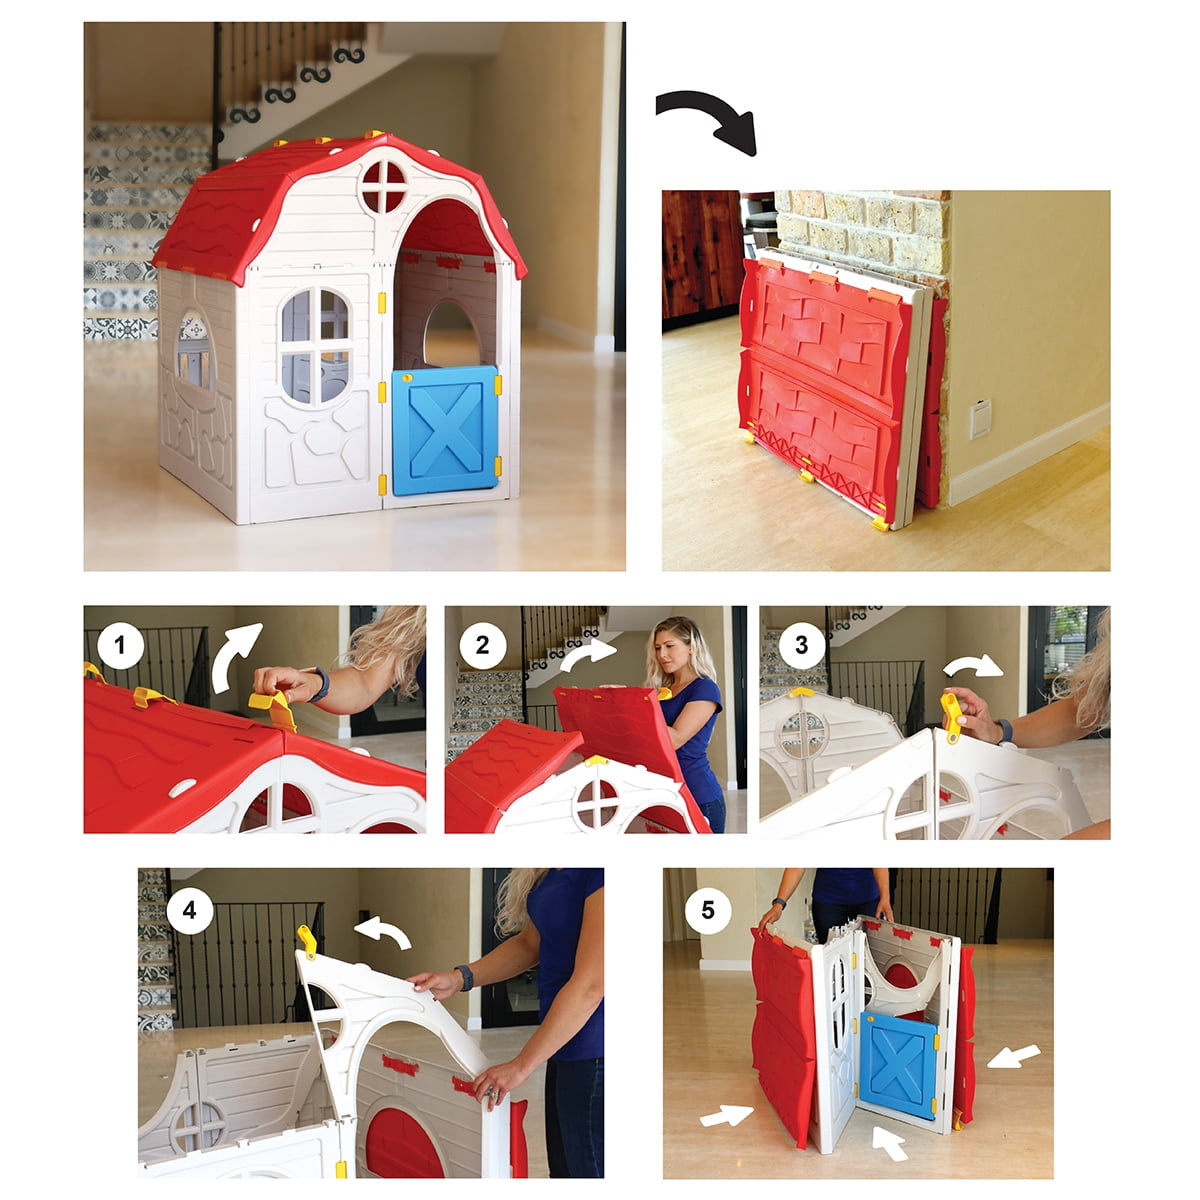 Details about   Foldable Kids Cottage Playhouse Plastic Play House Toy Play Portable Outdoor 